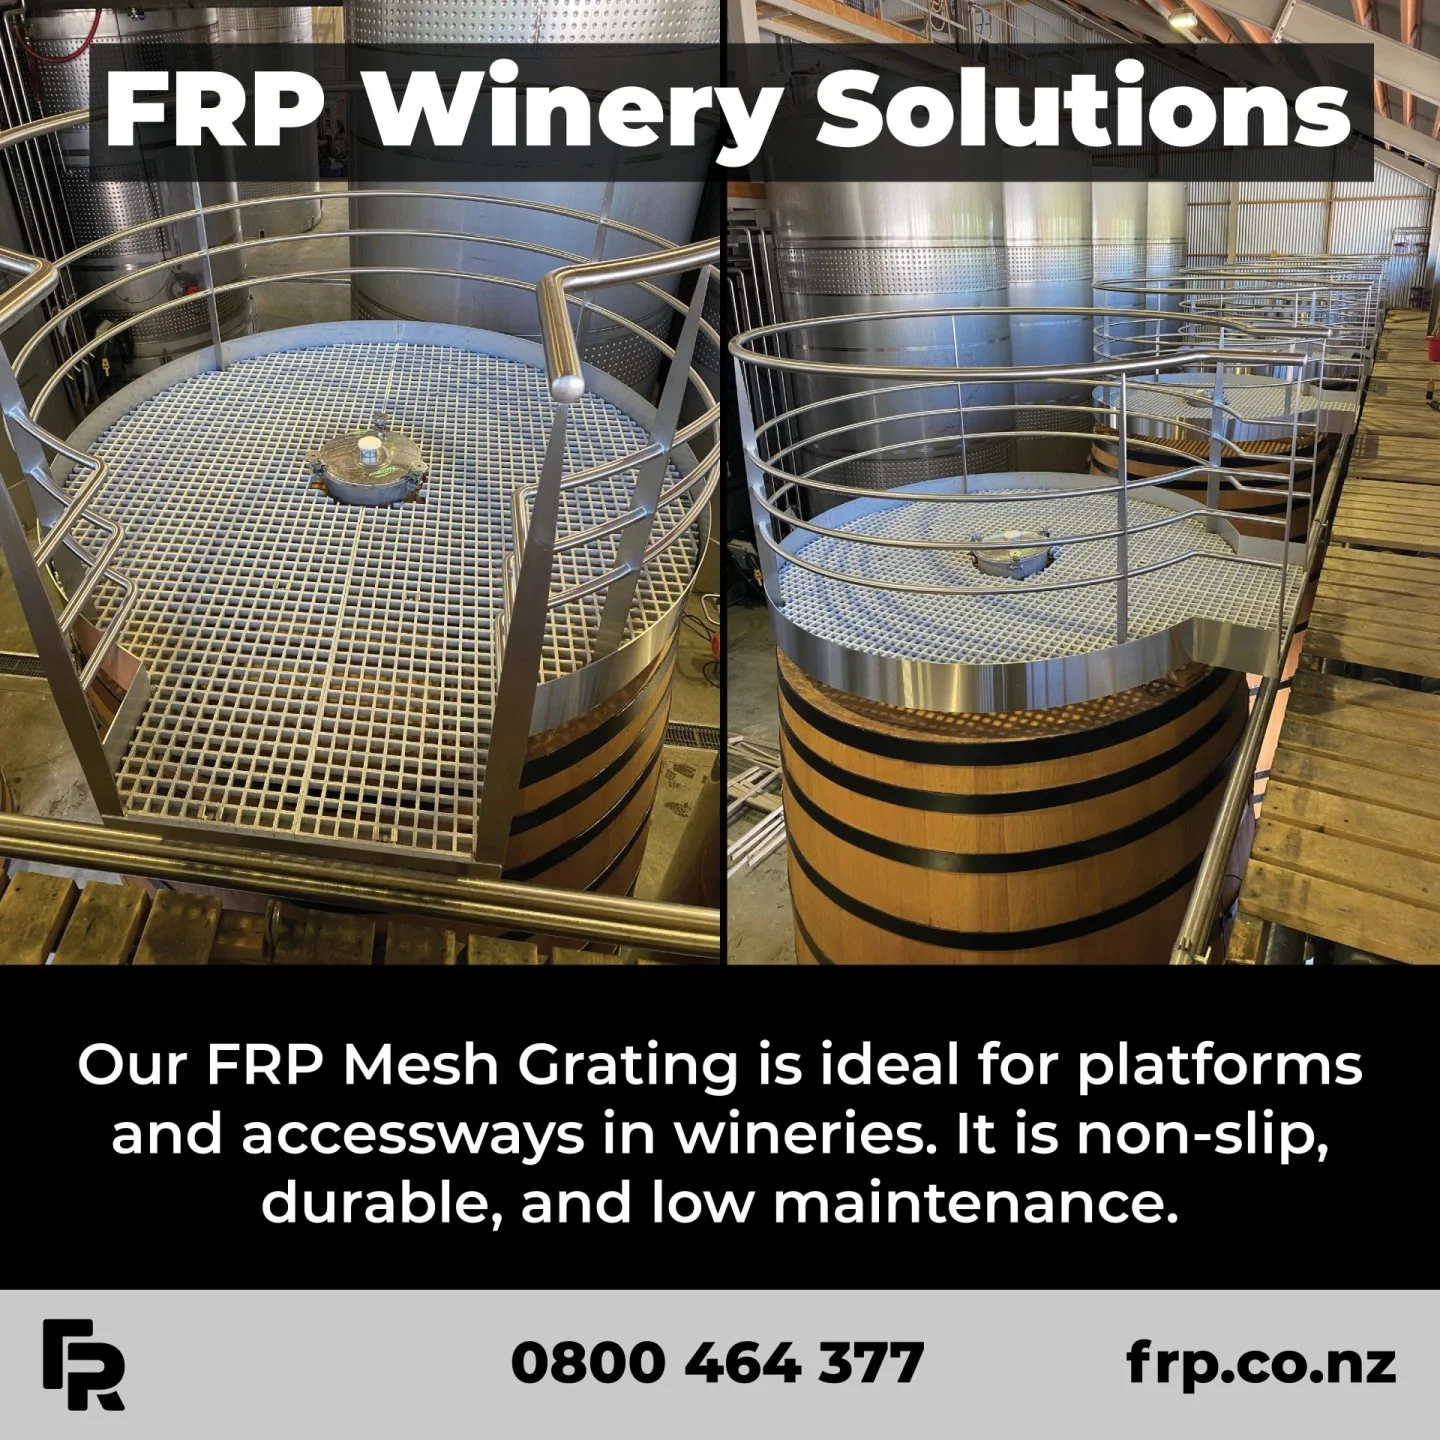 Enquire today!

#frp #frpproducts #winery #winegrowing #winemaker #commercial #nzarchitects